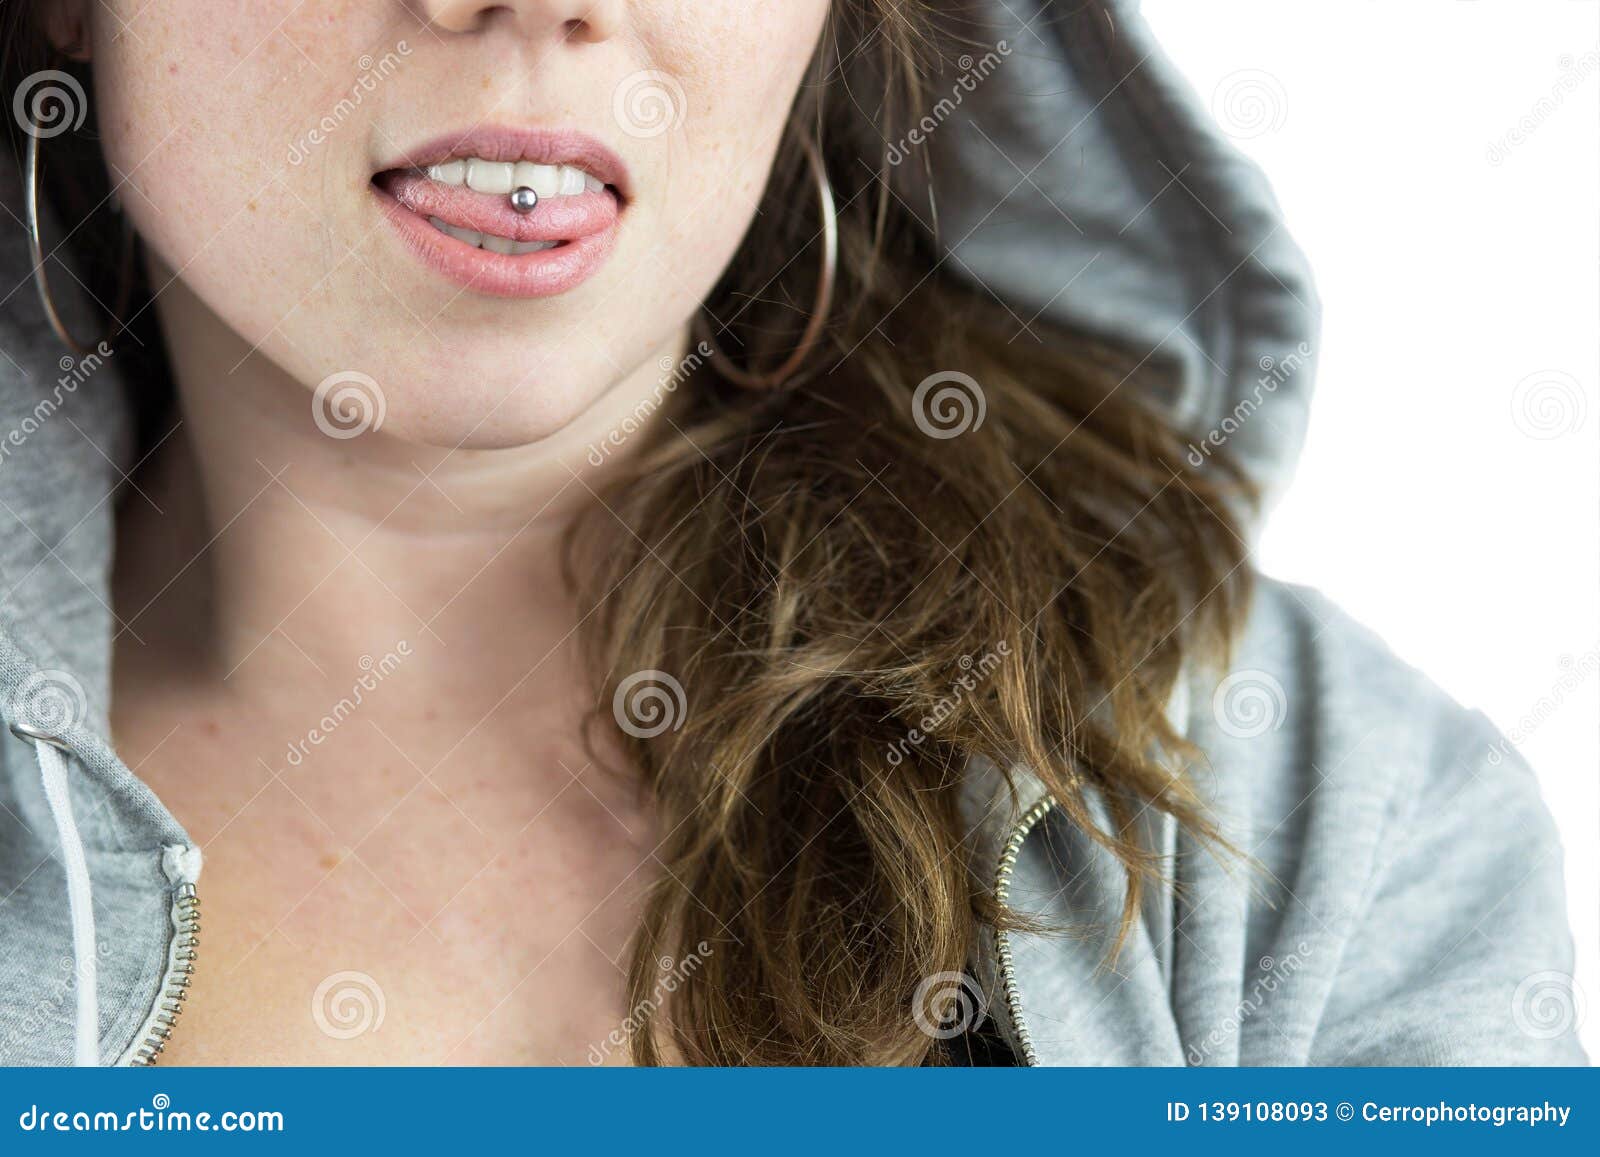 Young Teen Girl With Tongue Piercing And Hoodie Stock Image Image Of